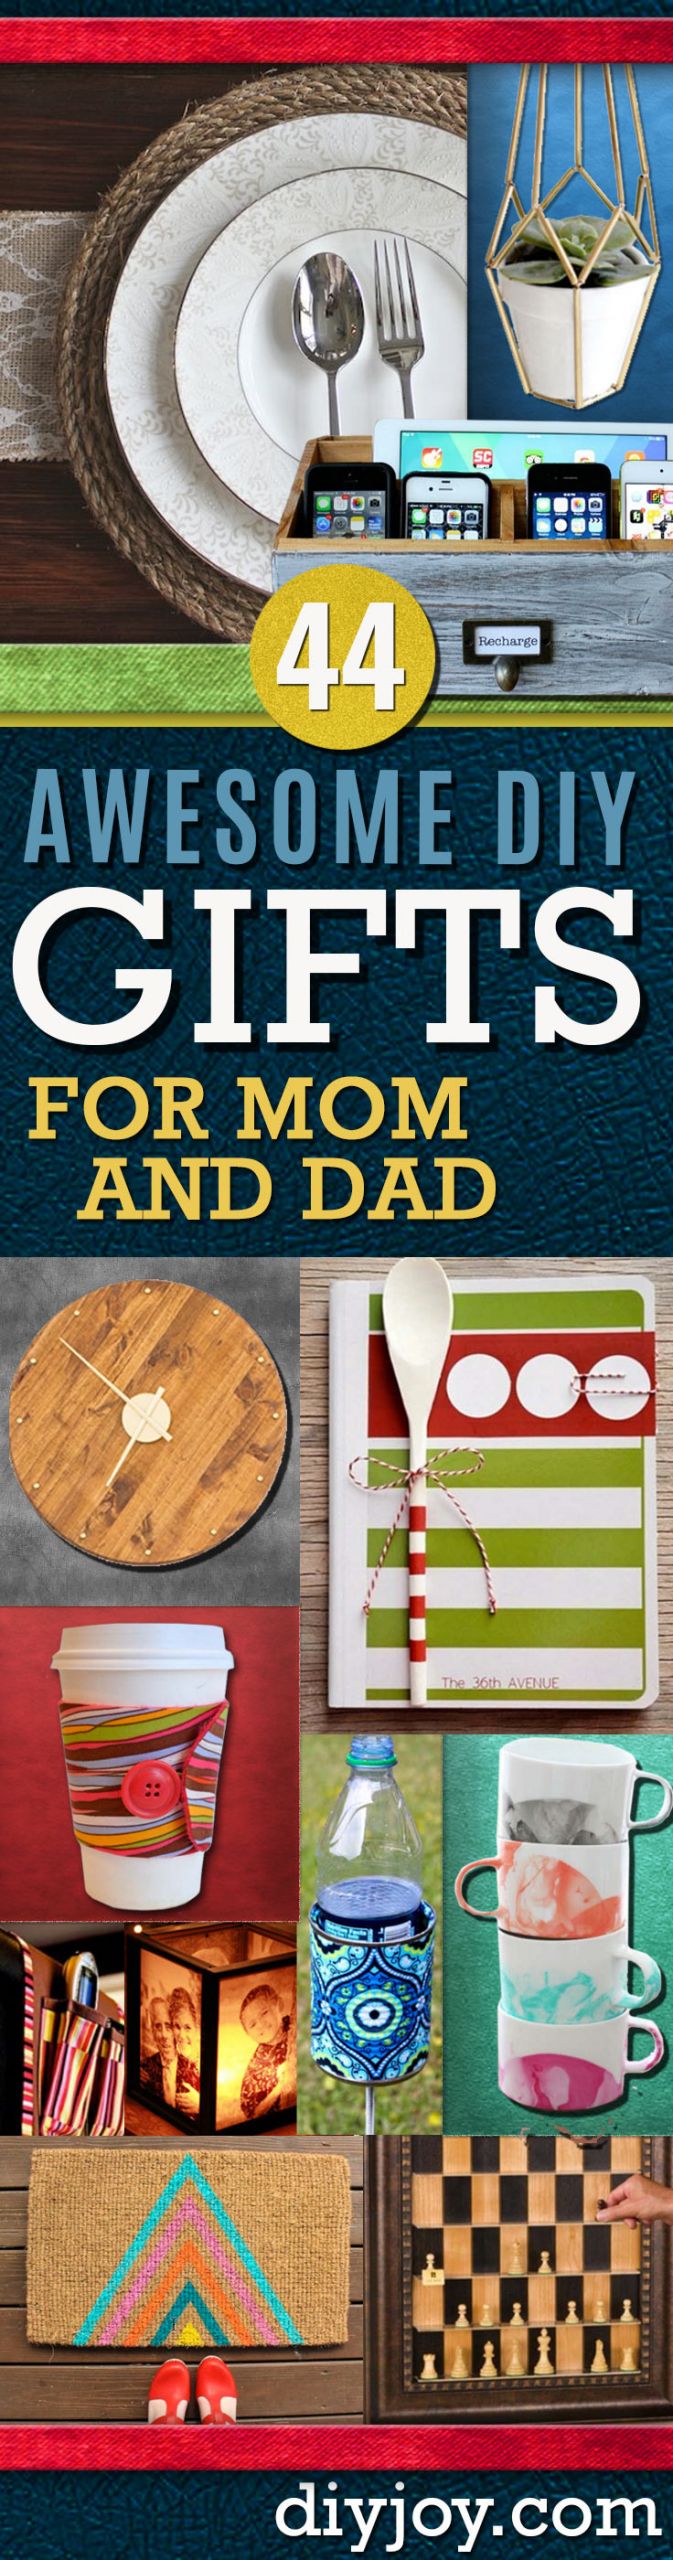 Ideas For Christmas Gift For Mom
 Awesome DIY Gift Ideas Mom and Dad Will Love